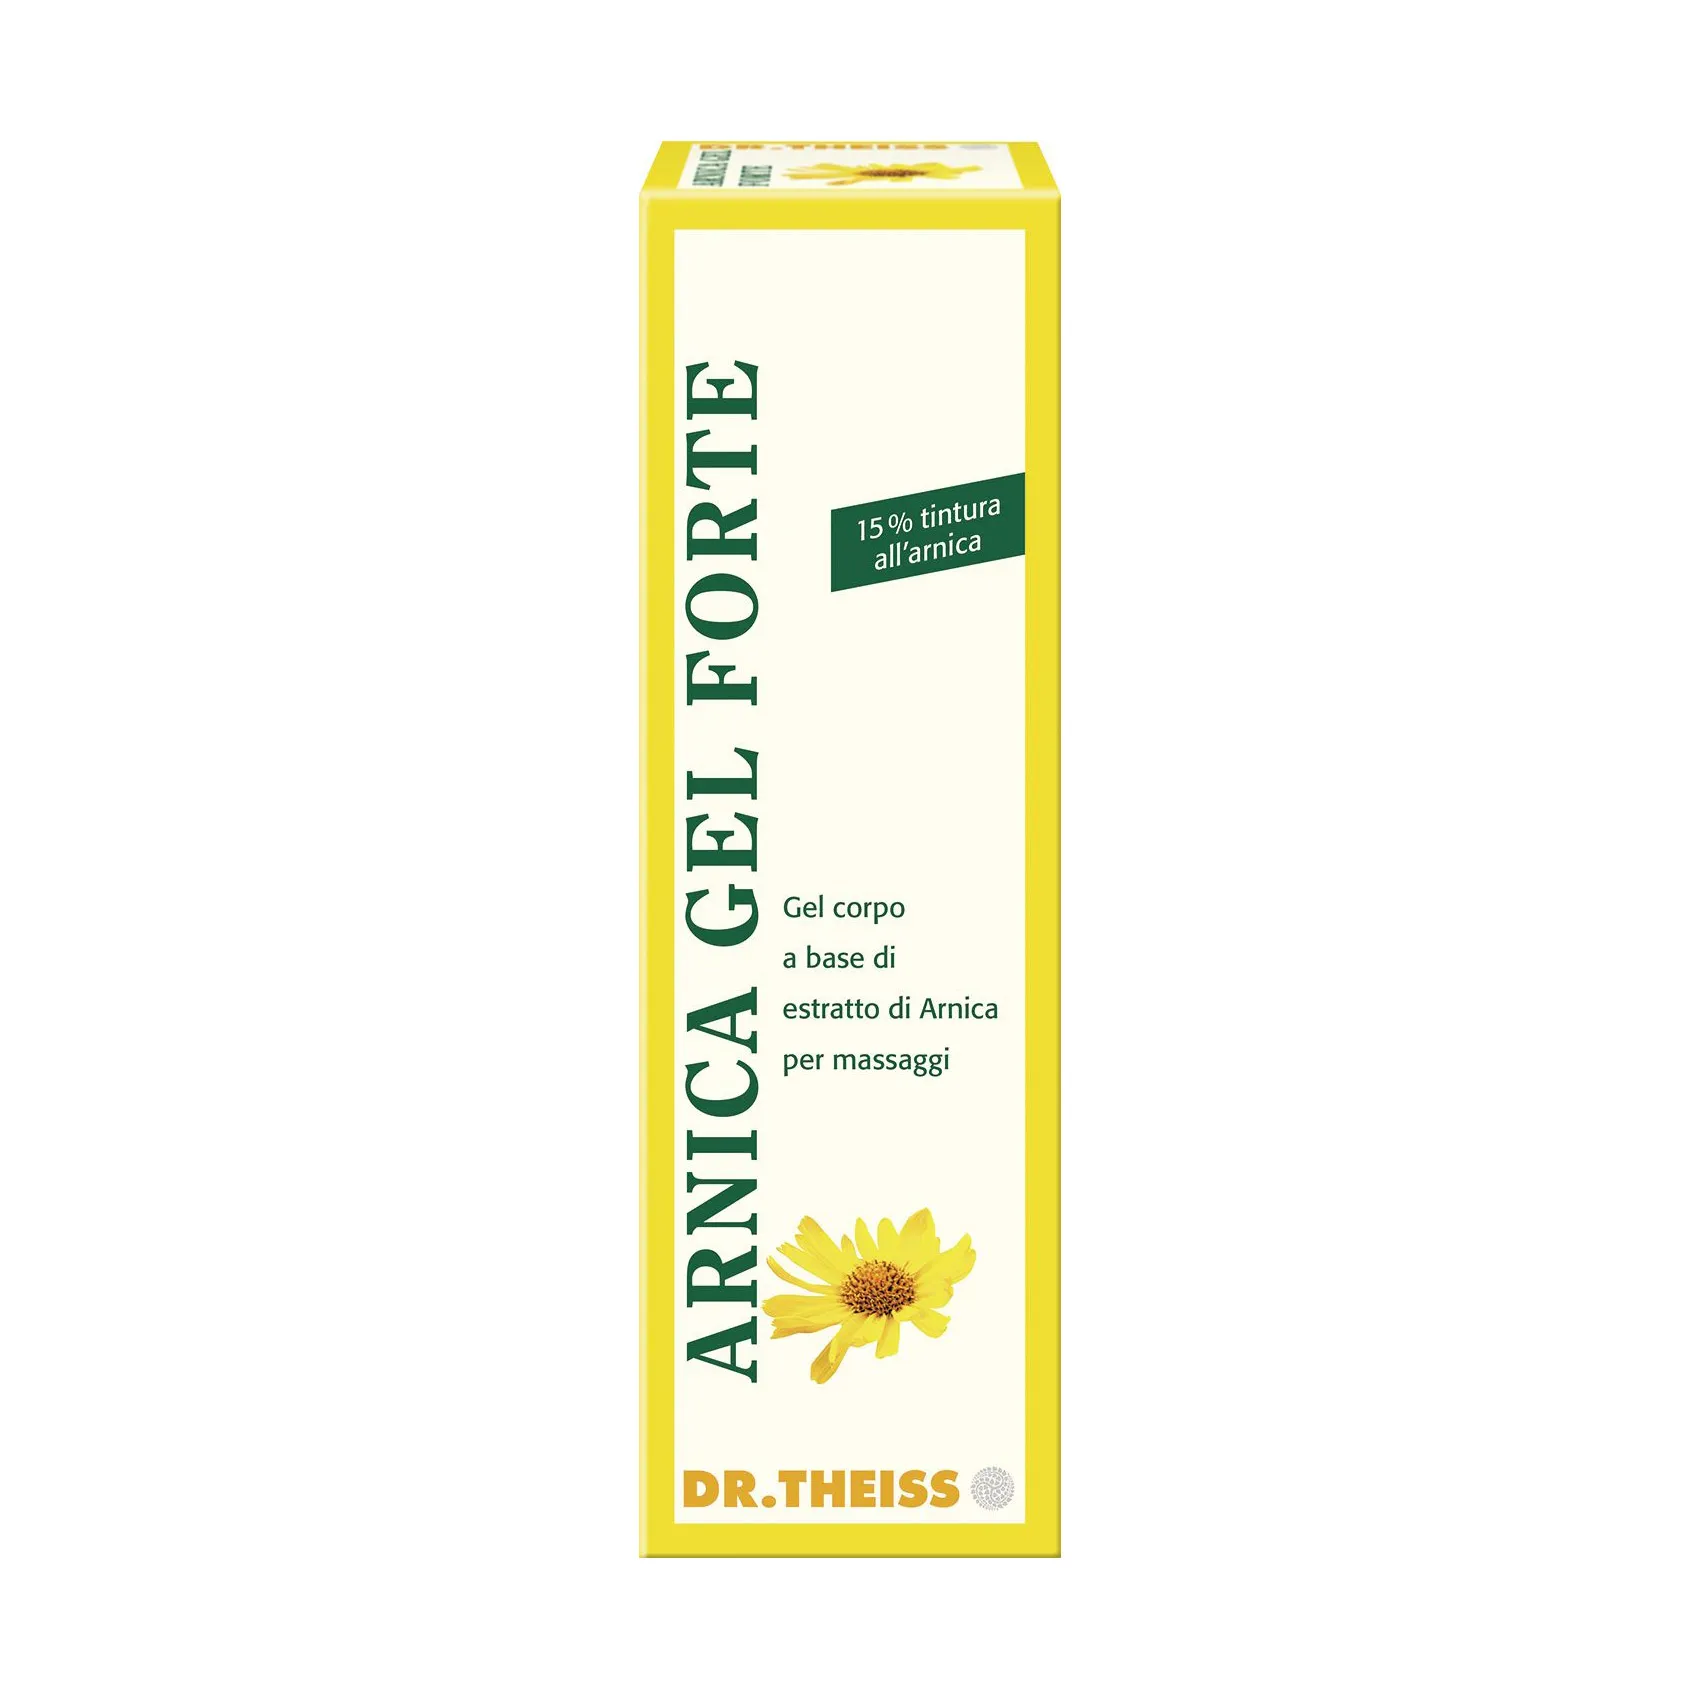 Dr.theiss Arnica Gel Forte 100ml